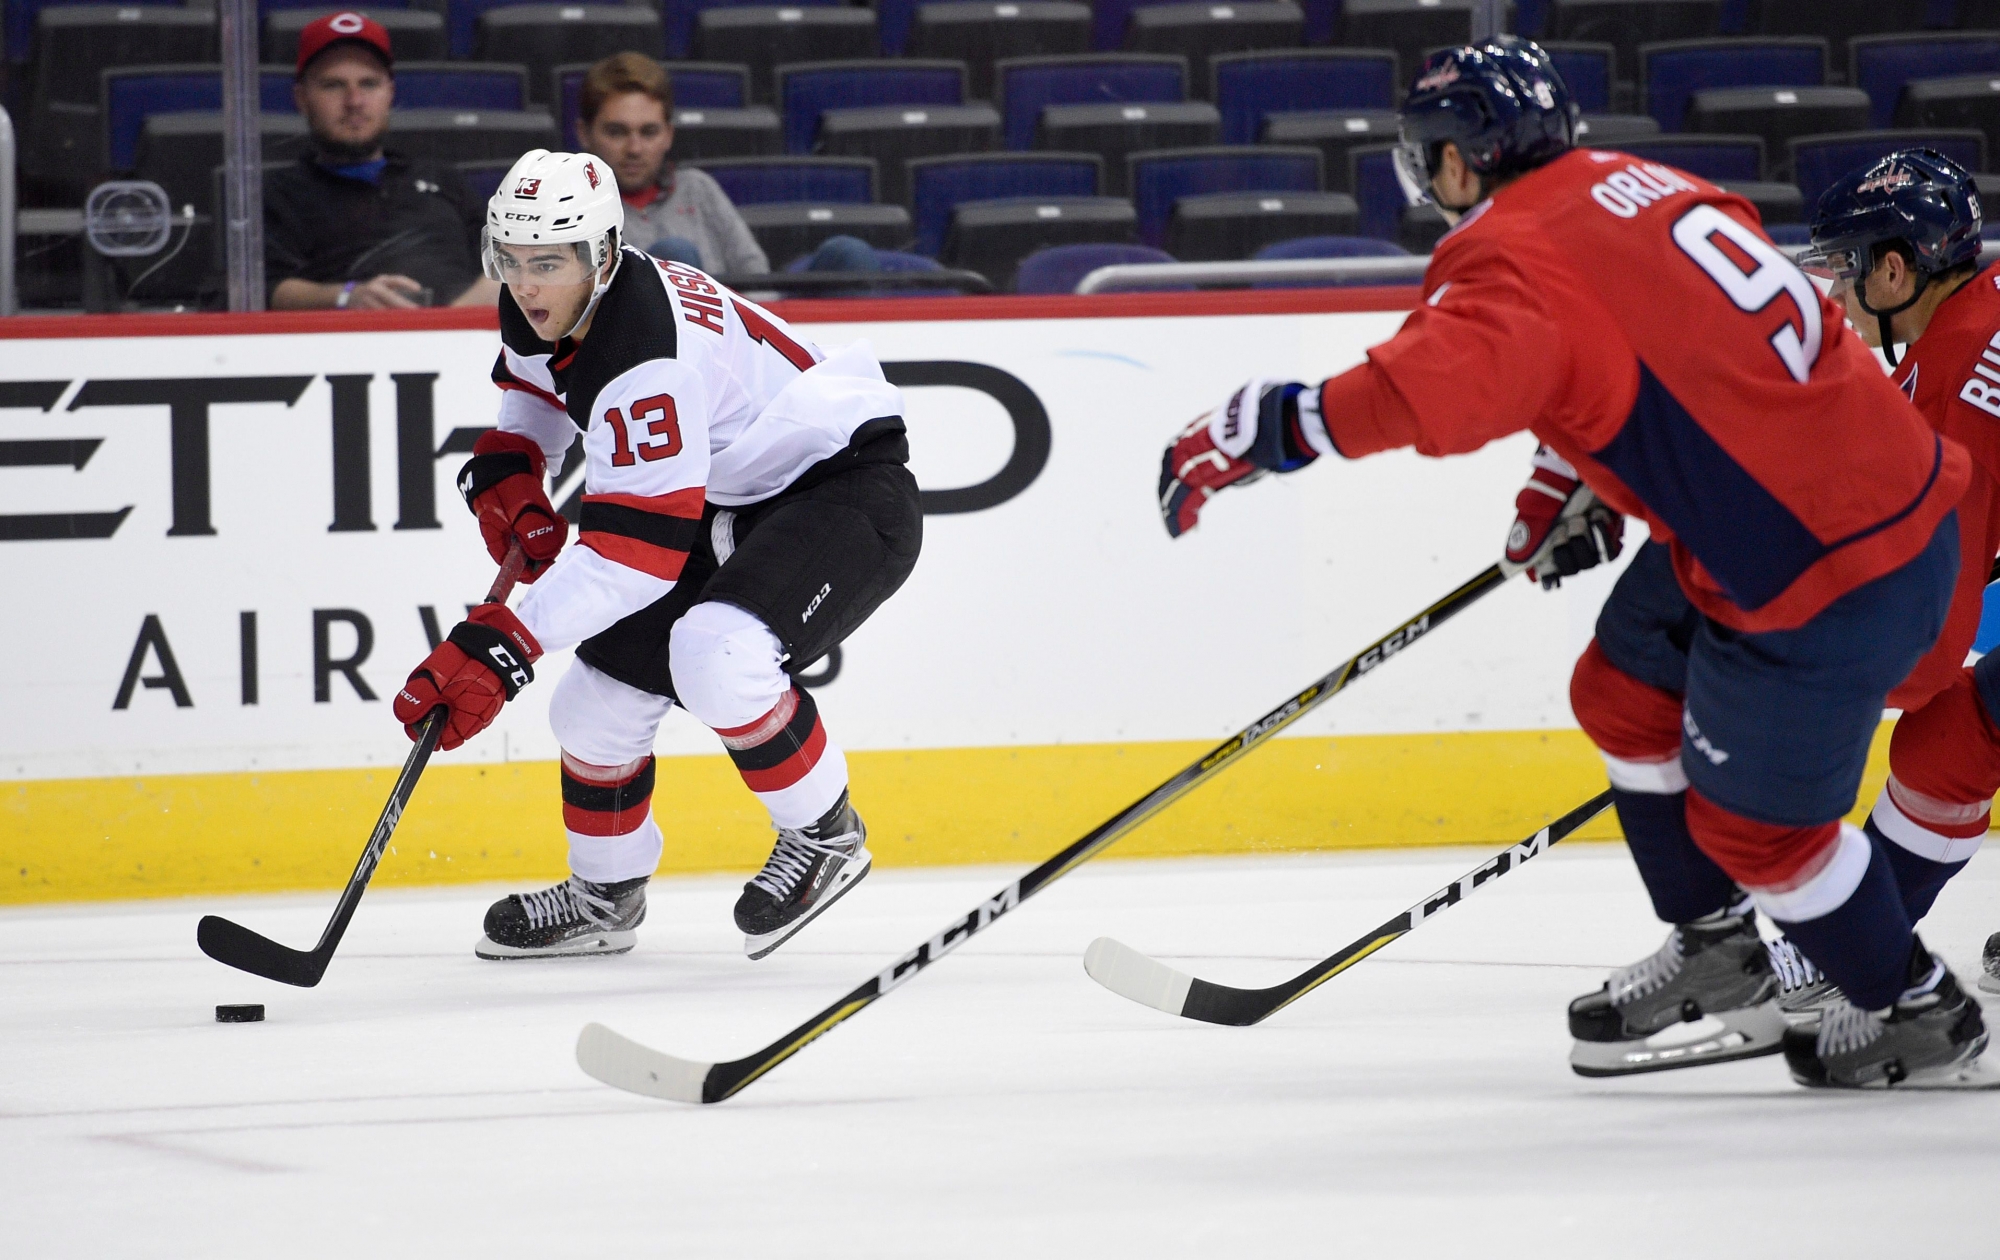 New Jersey Devils center Nico Hischier (13), of Switzerland, skates with the puck past Washington Capitals defenseman Dmitry Orlov (9), of Russia, during the first period of an NHL preseason hockey game, Wednesday, Sept. 27, 2017, in Washington. (AP Photo/Nick Wass) Devils Capitals Hockey